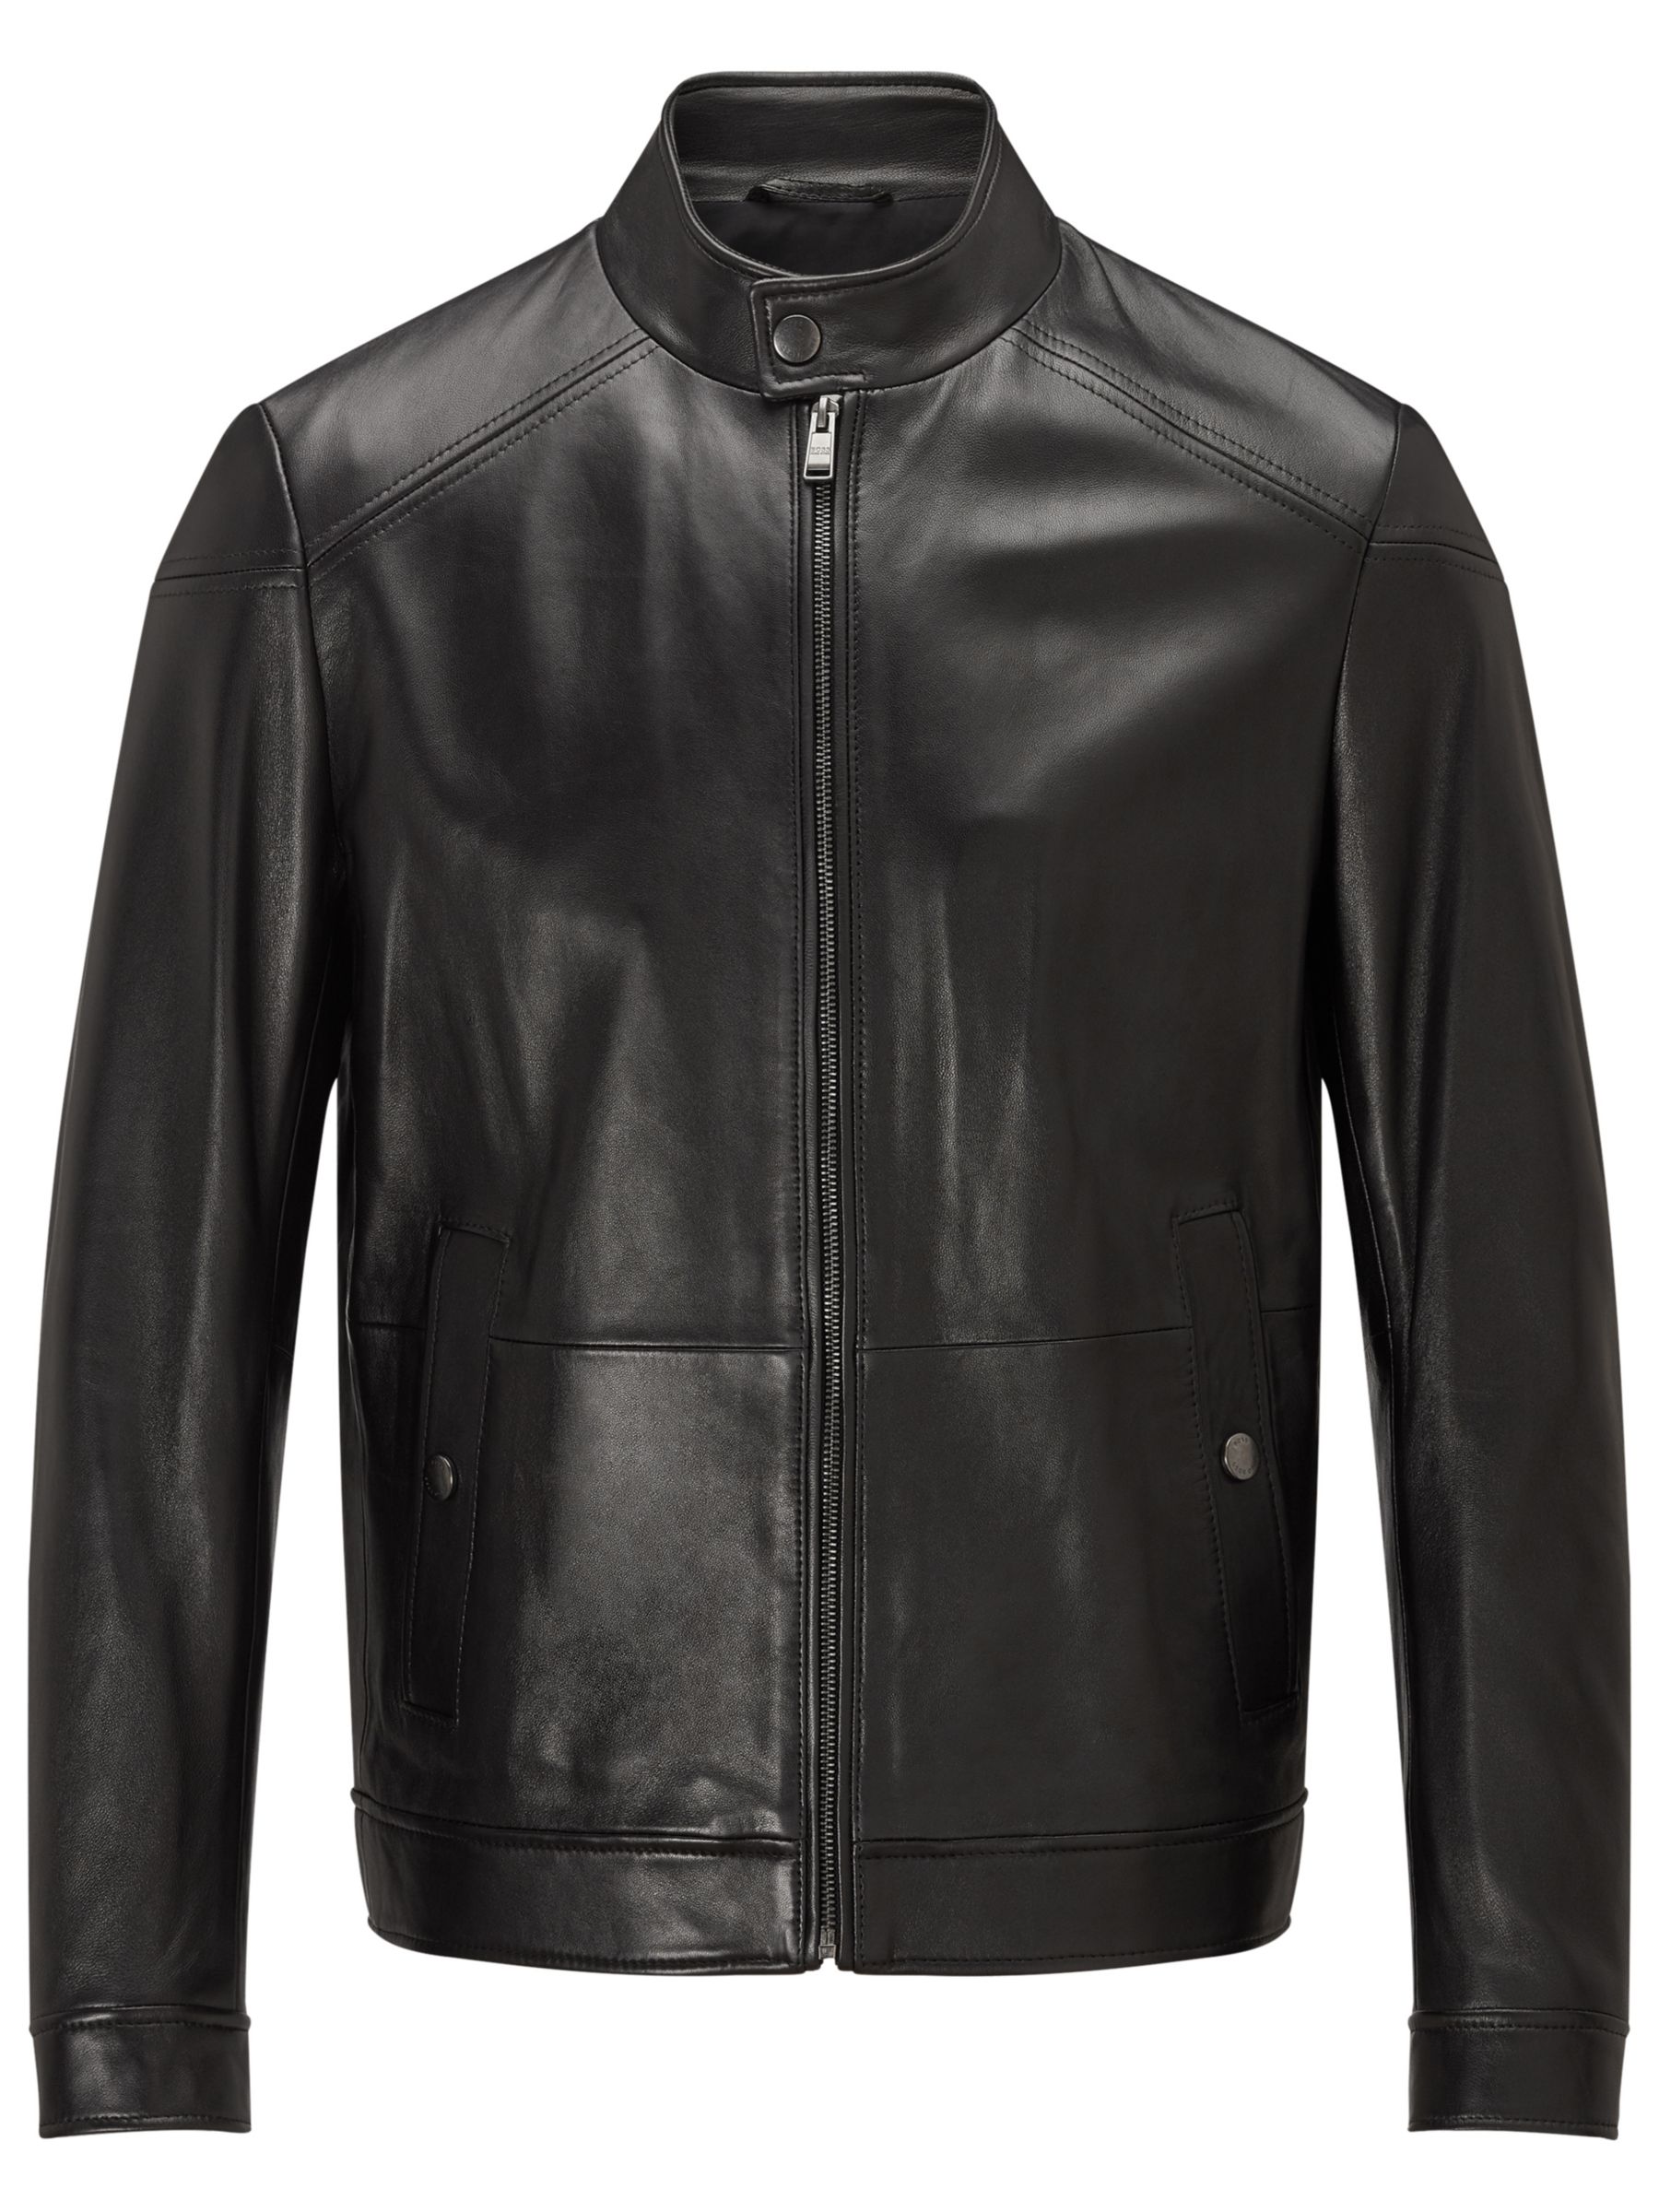 BOSS Nocan Leather Jacket, Black at 